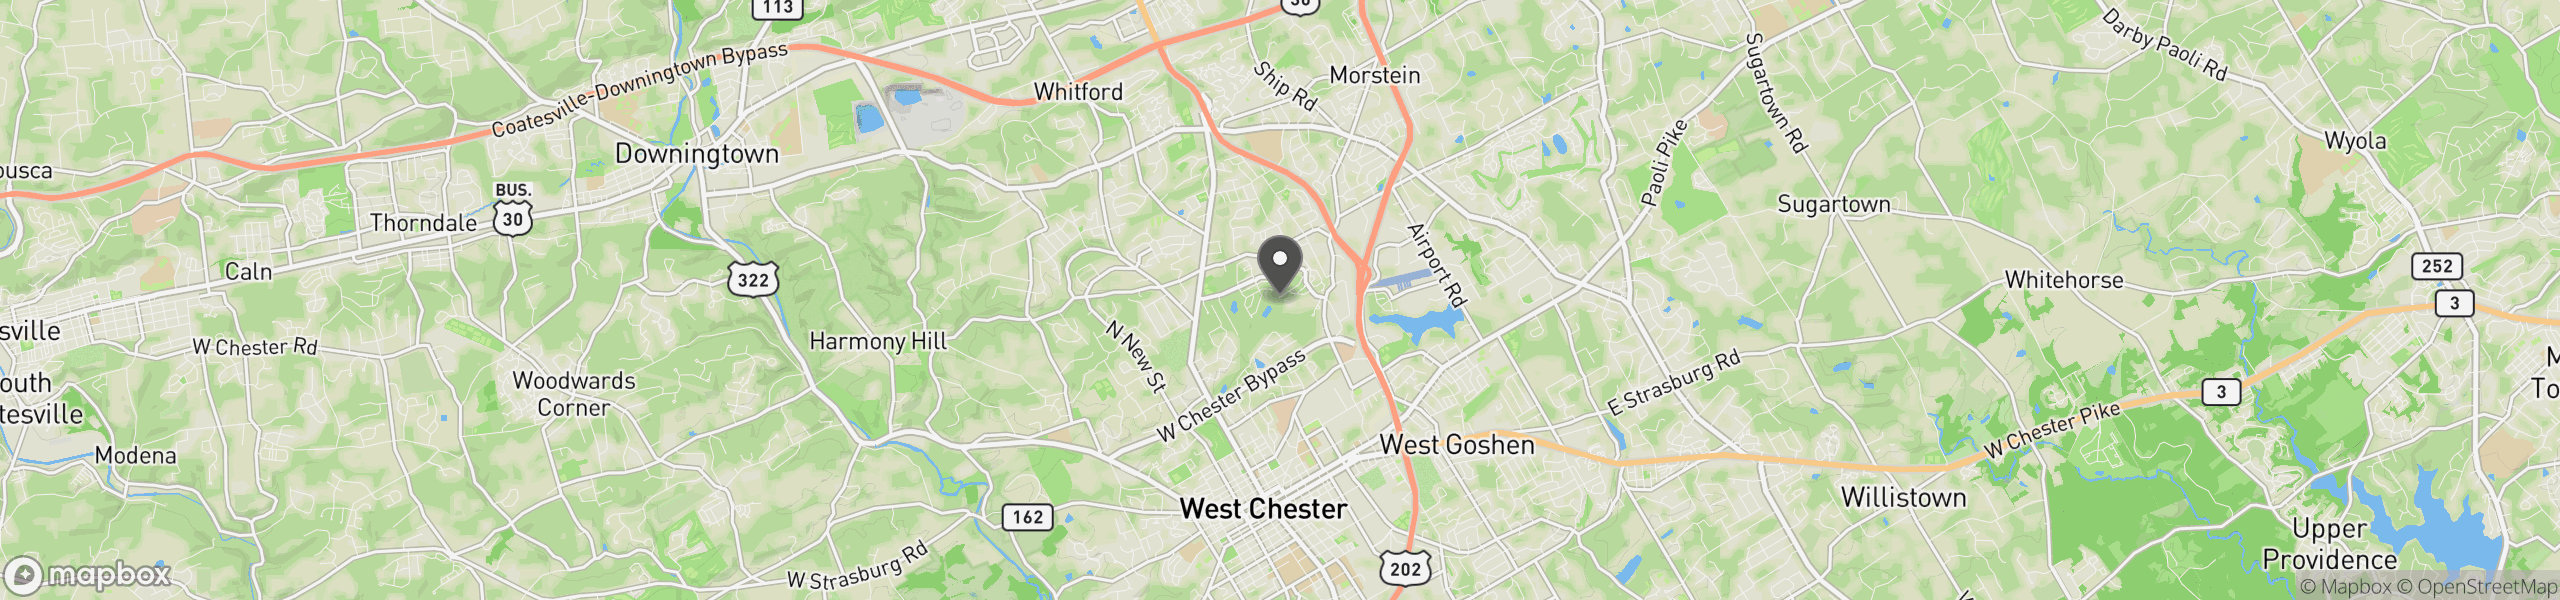 West Chester, PA 19380